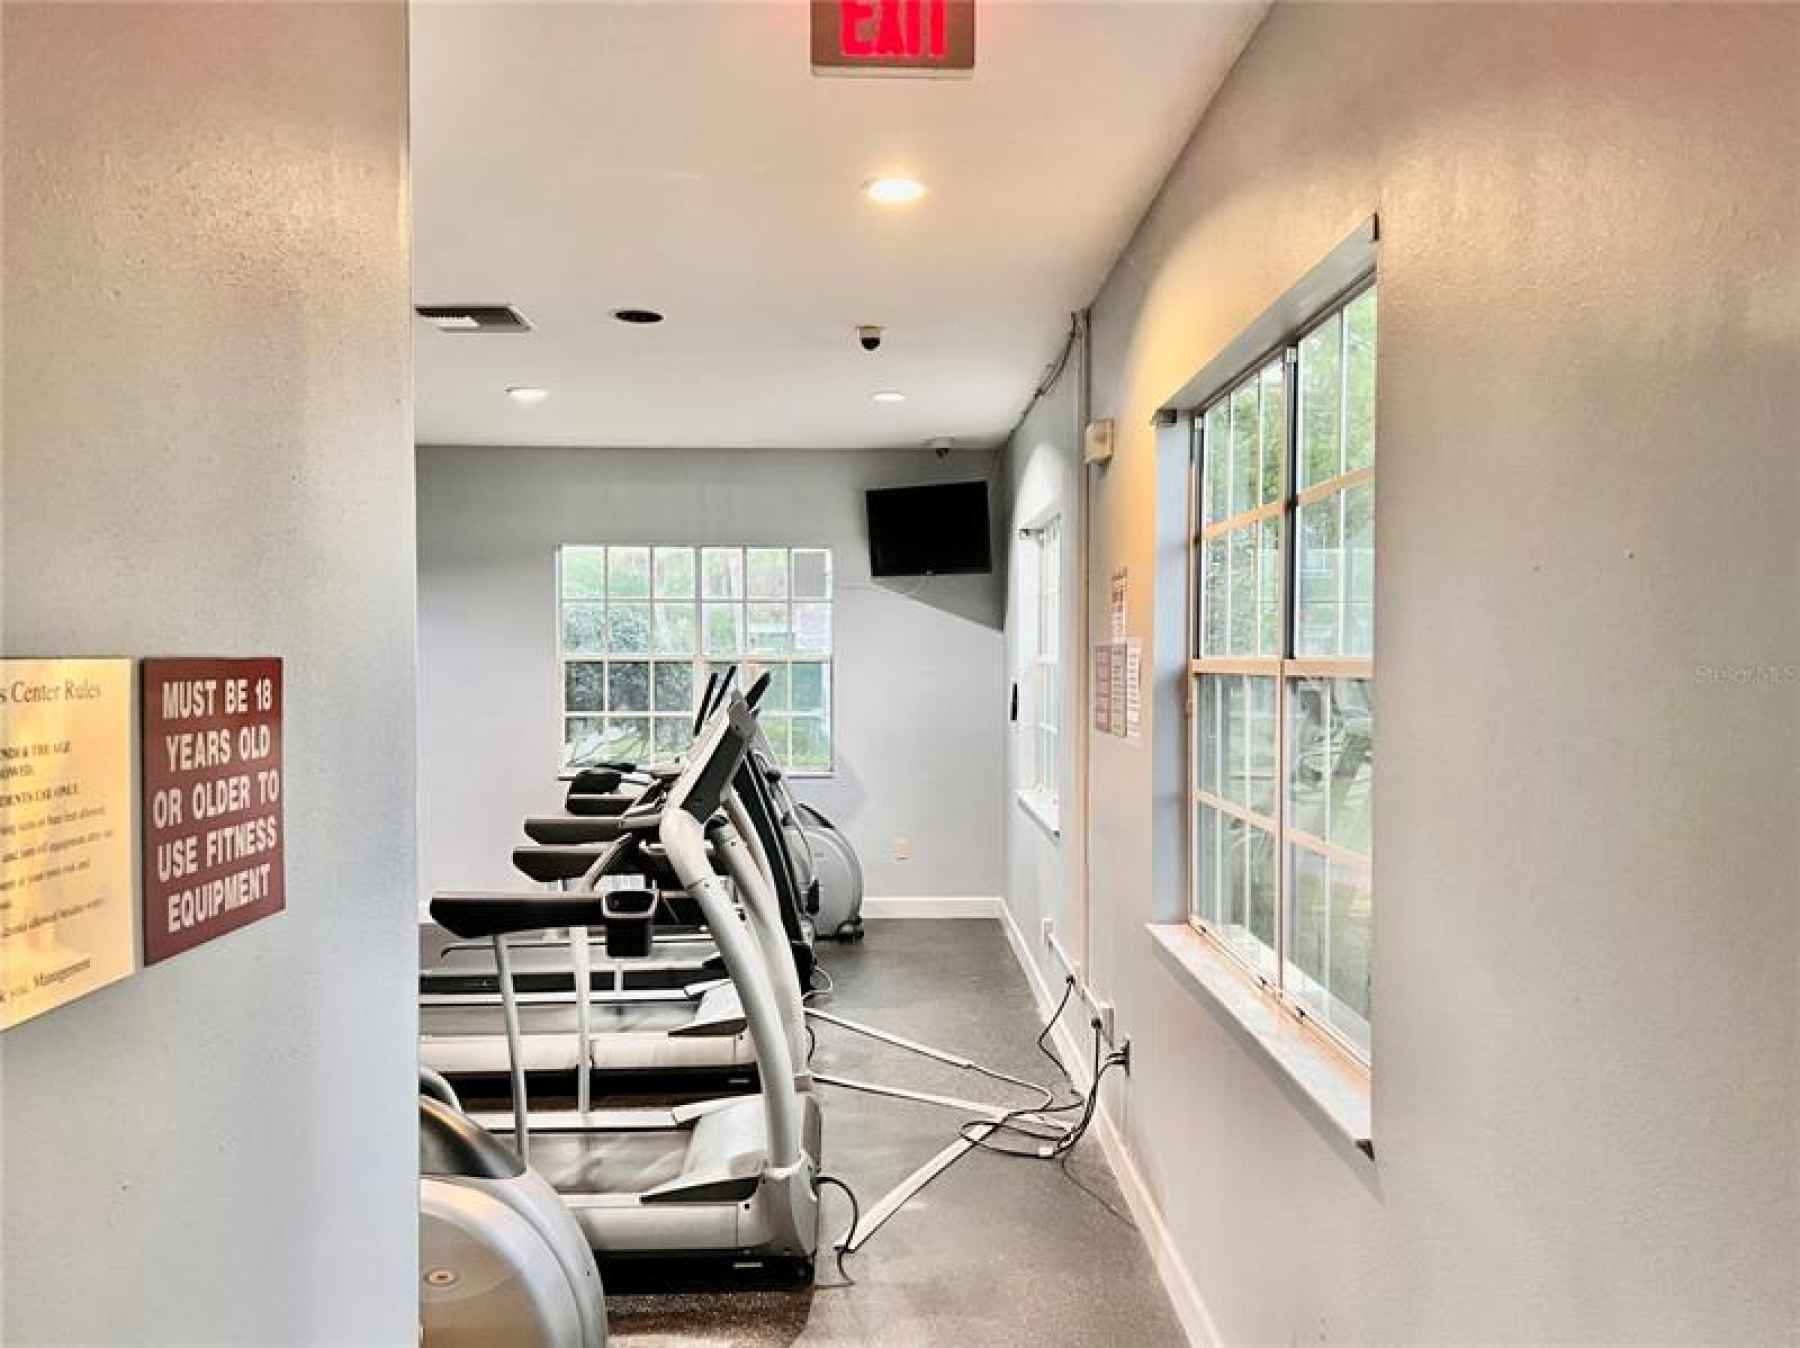 Entrance to fitness room